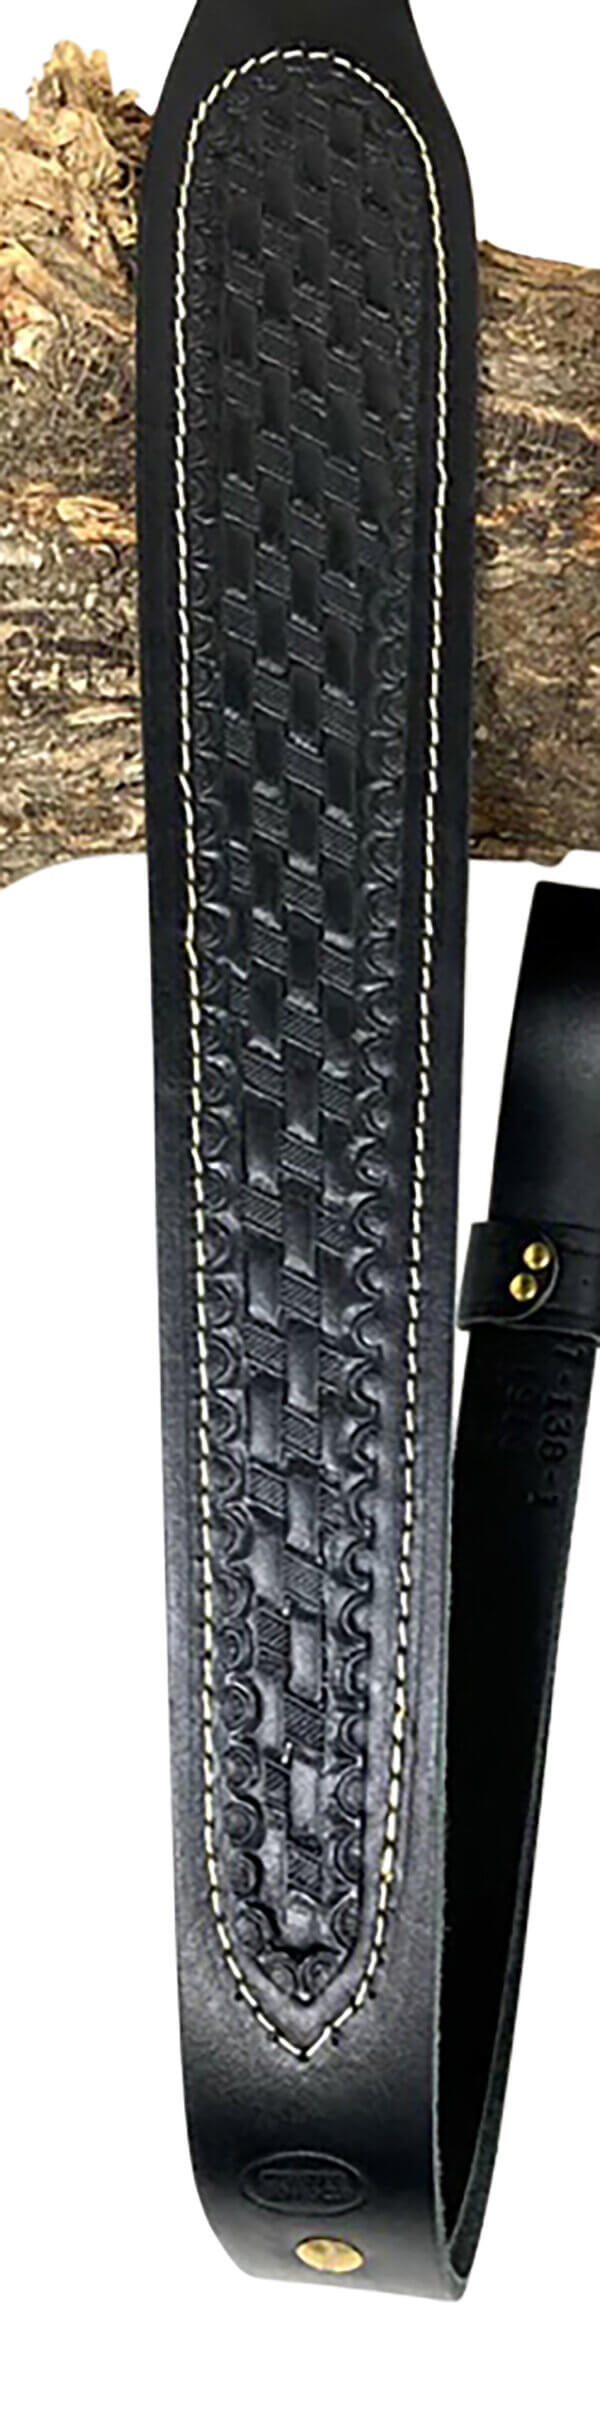 Hunter Company 027-138-01 Cobra Black Leather/Suede with Basket Weave Design for Rifle